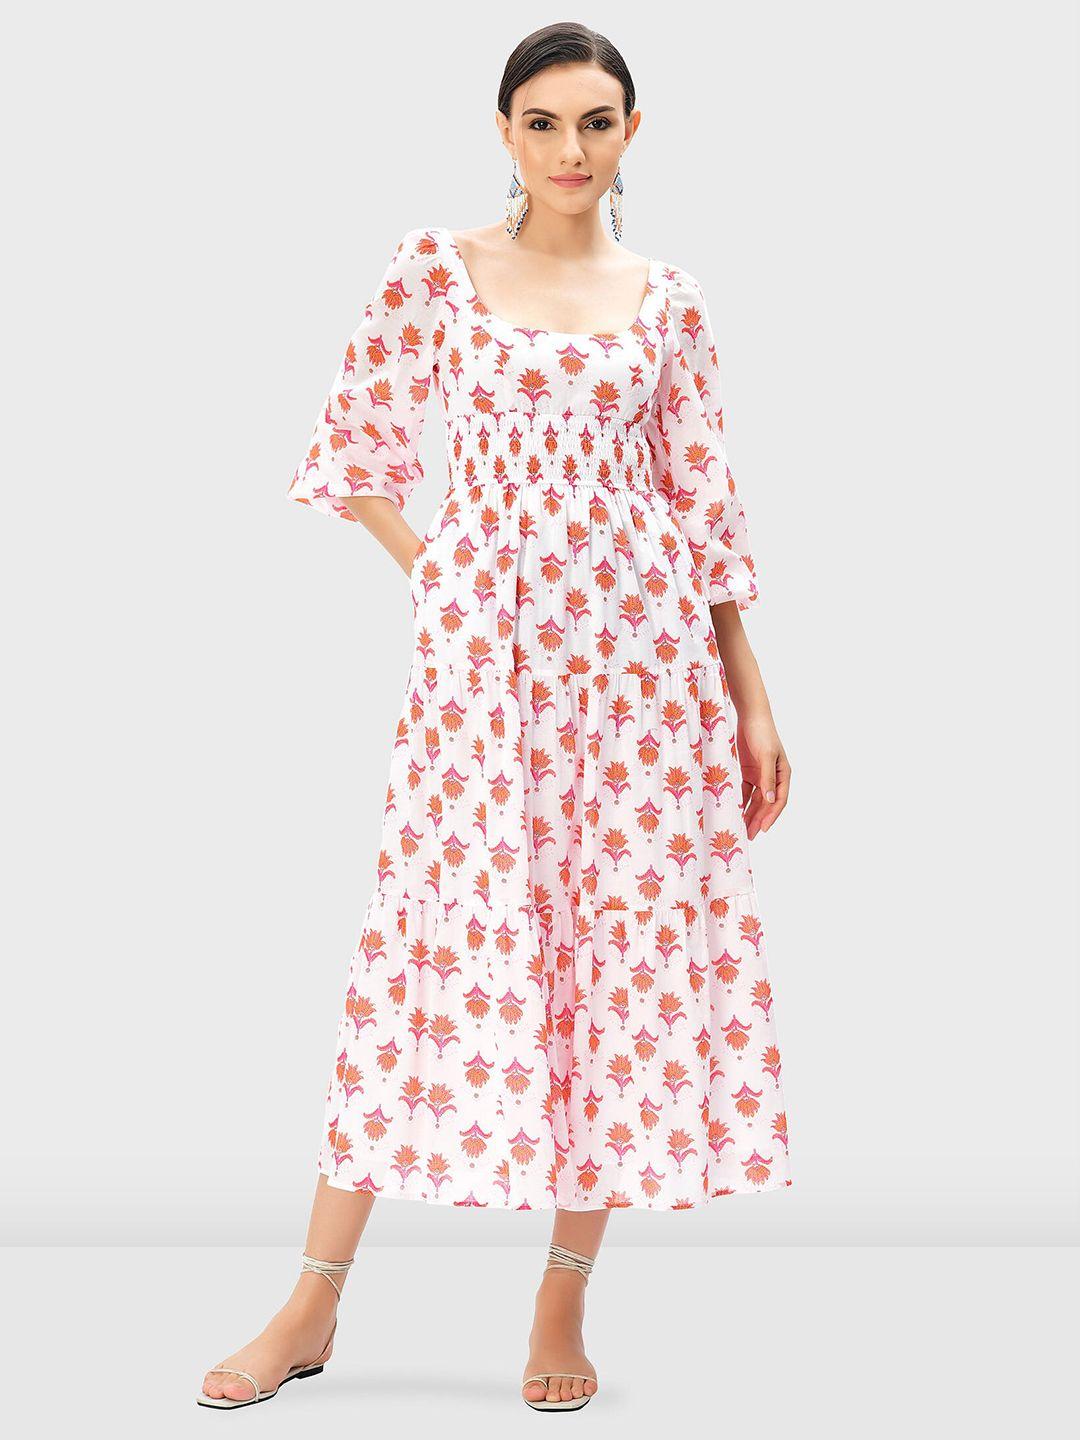 zapelle floral block printed tiered smocked cotton a-line midi dress